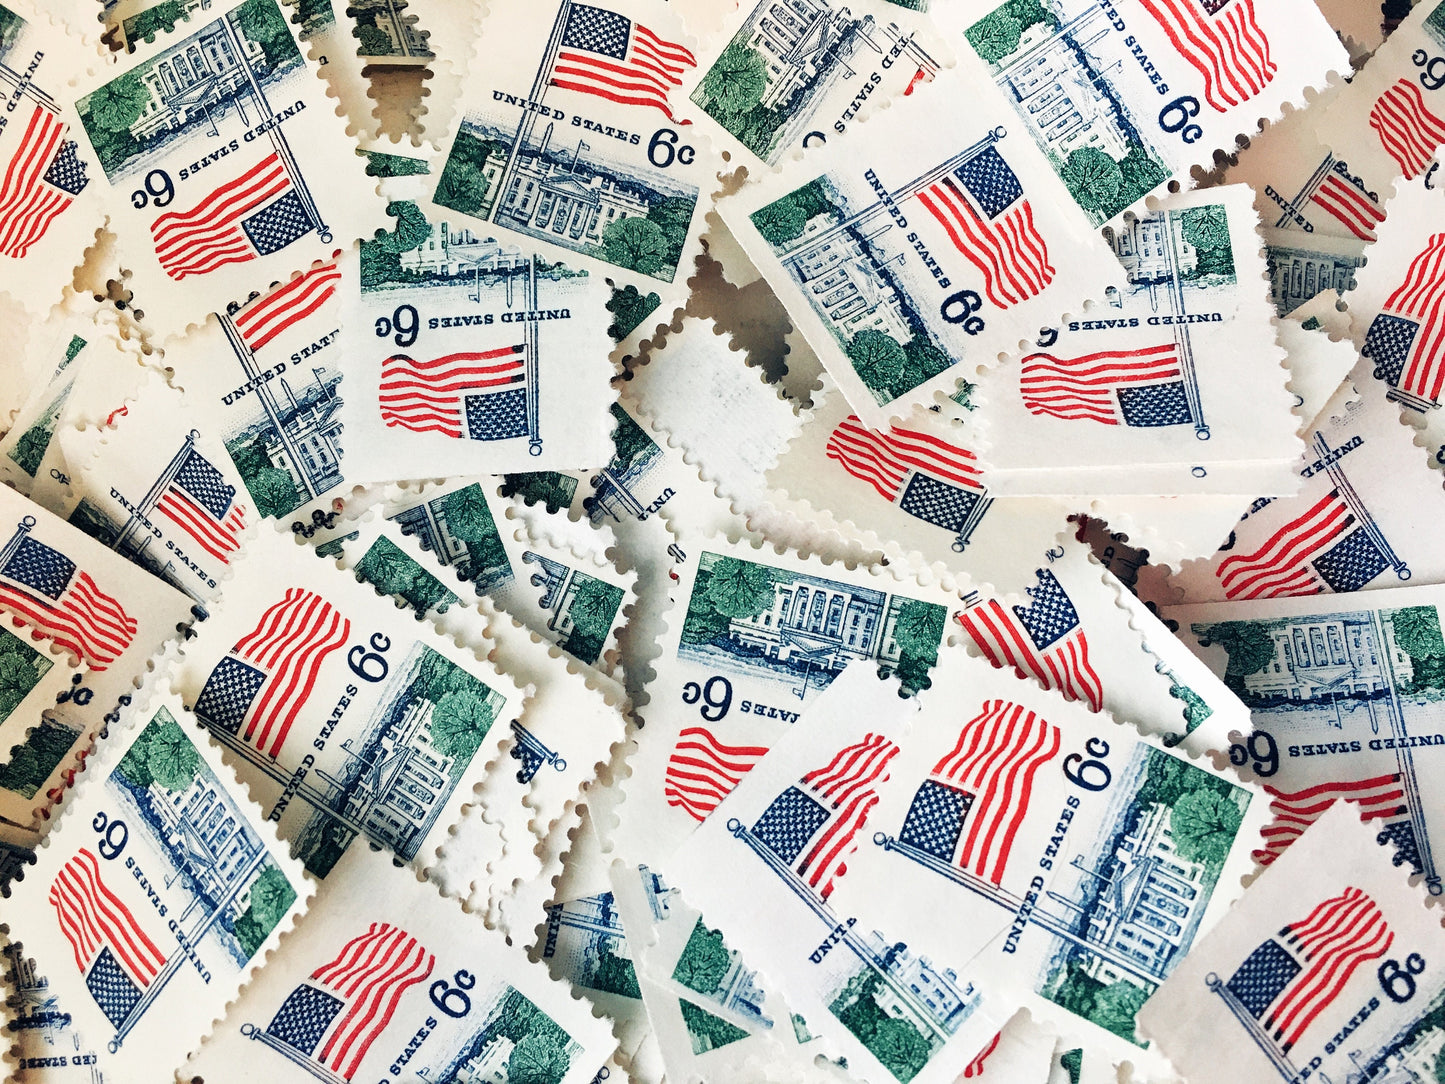 Vintage stamps/unused postage: fifty (50) unused 6 cent stamps (3 dollars face value), US flag motif for mailing, scrapbooking, journaling